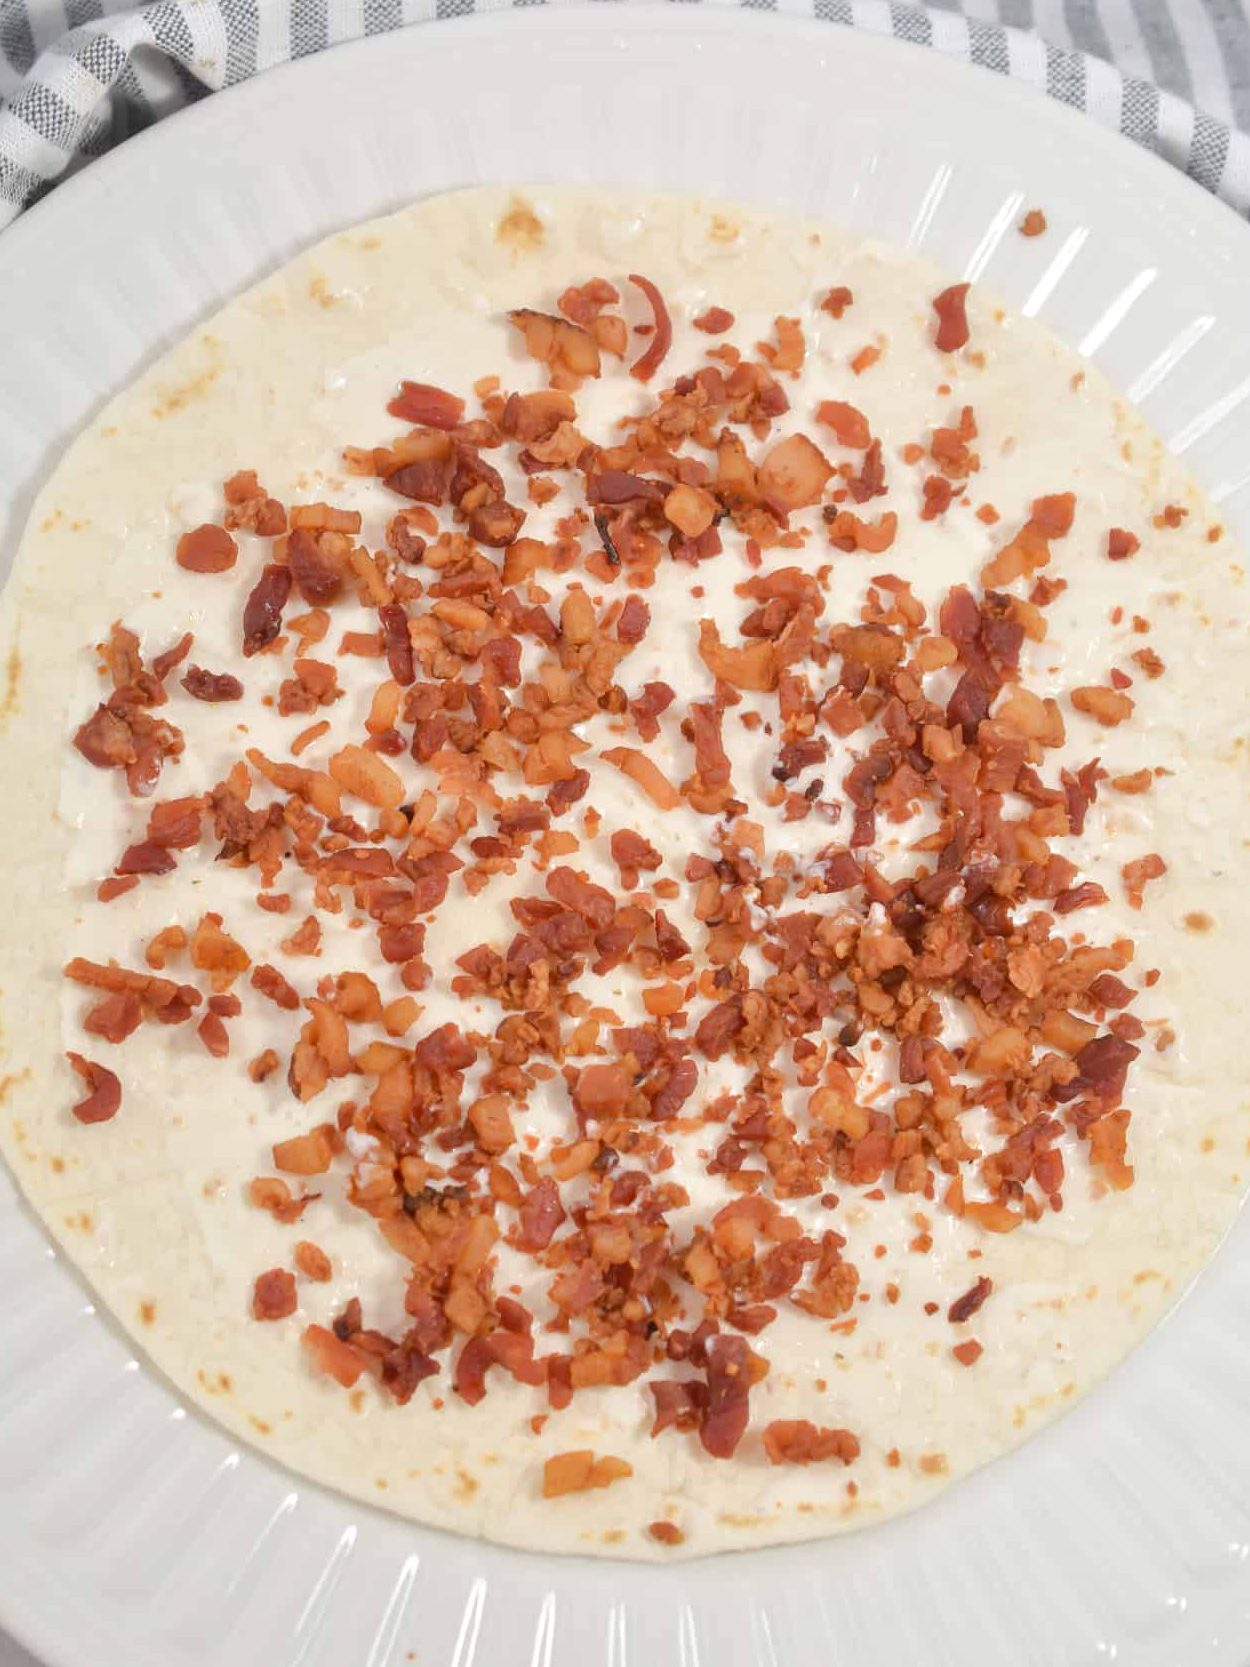 Top the tortillas with ⅓ cup bacon chopped.